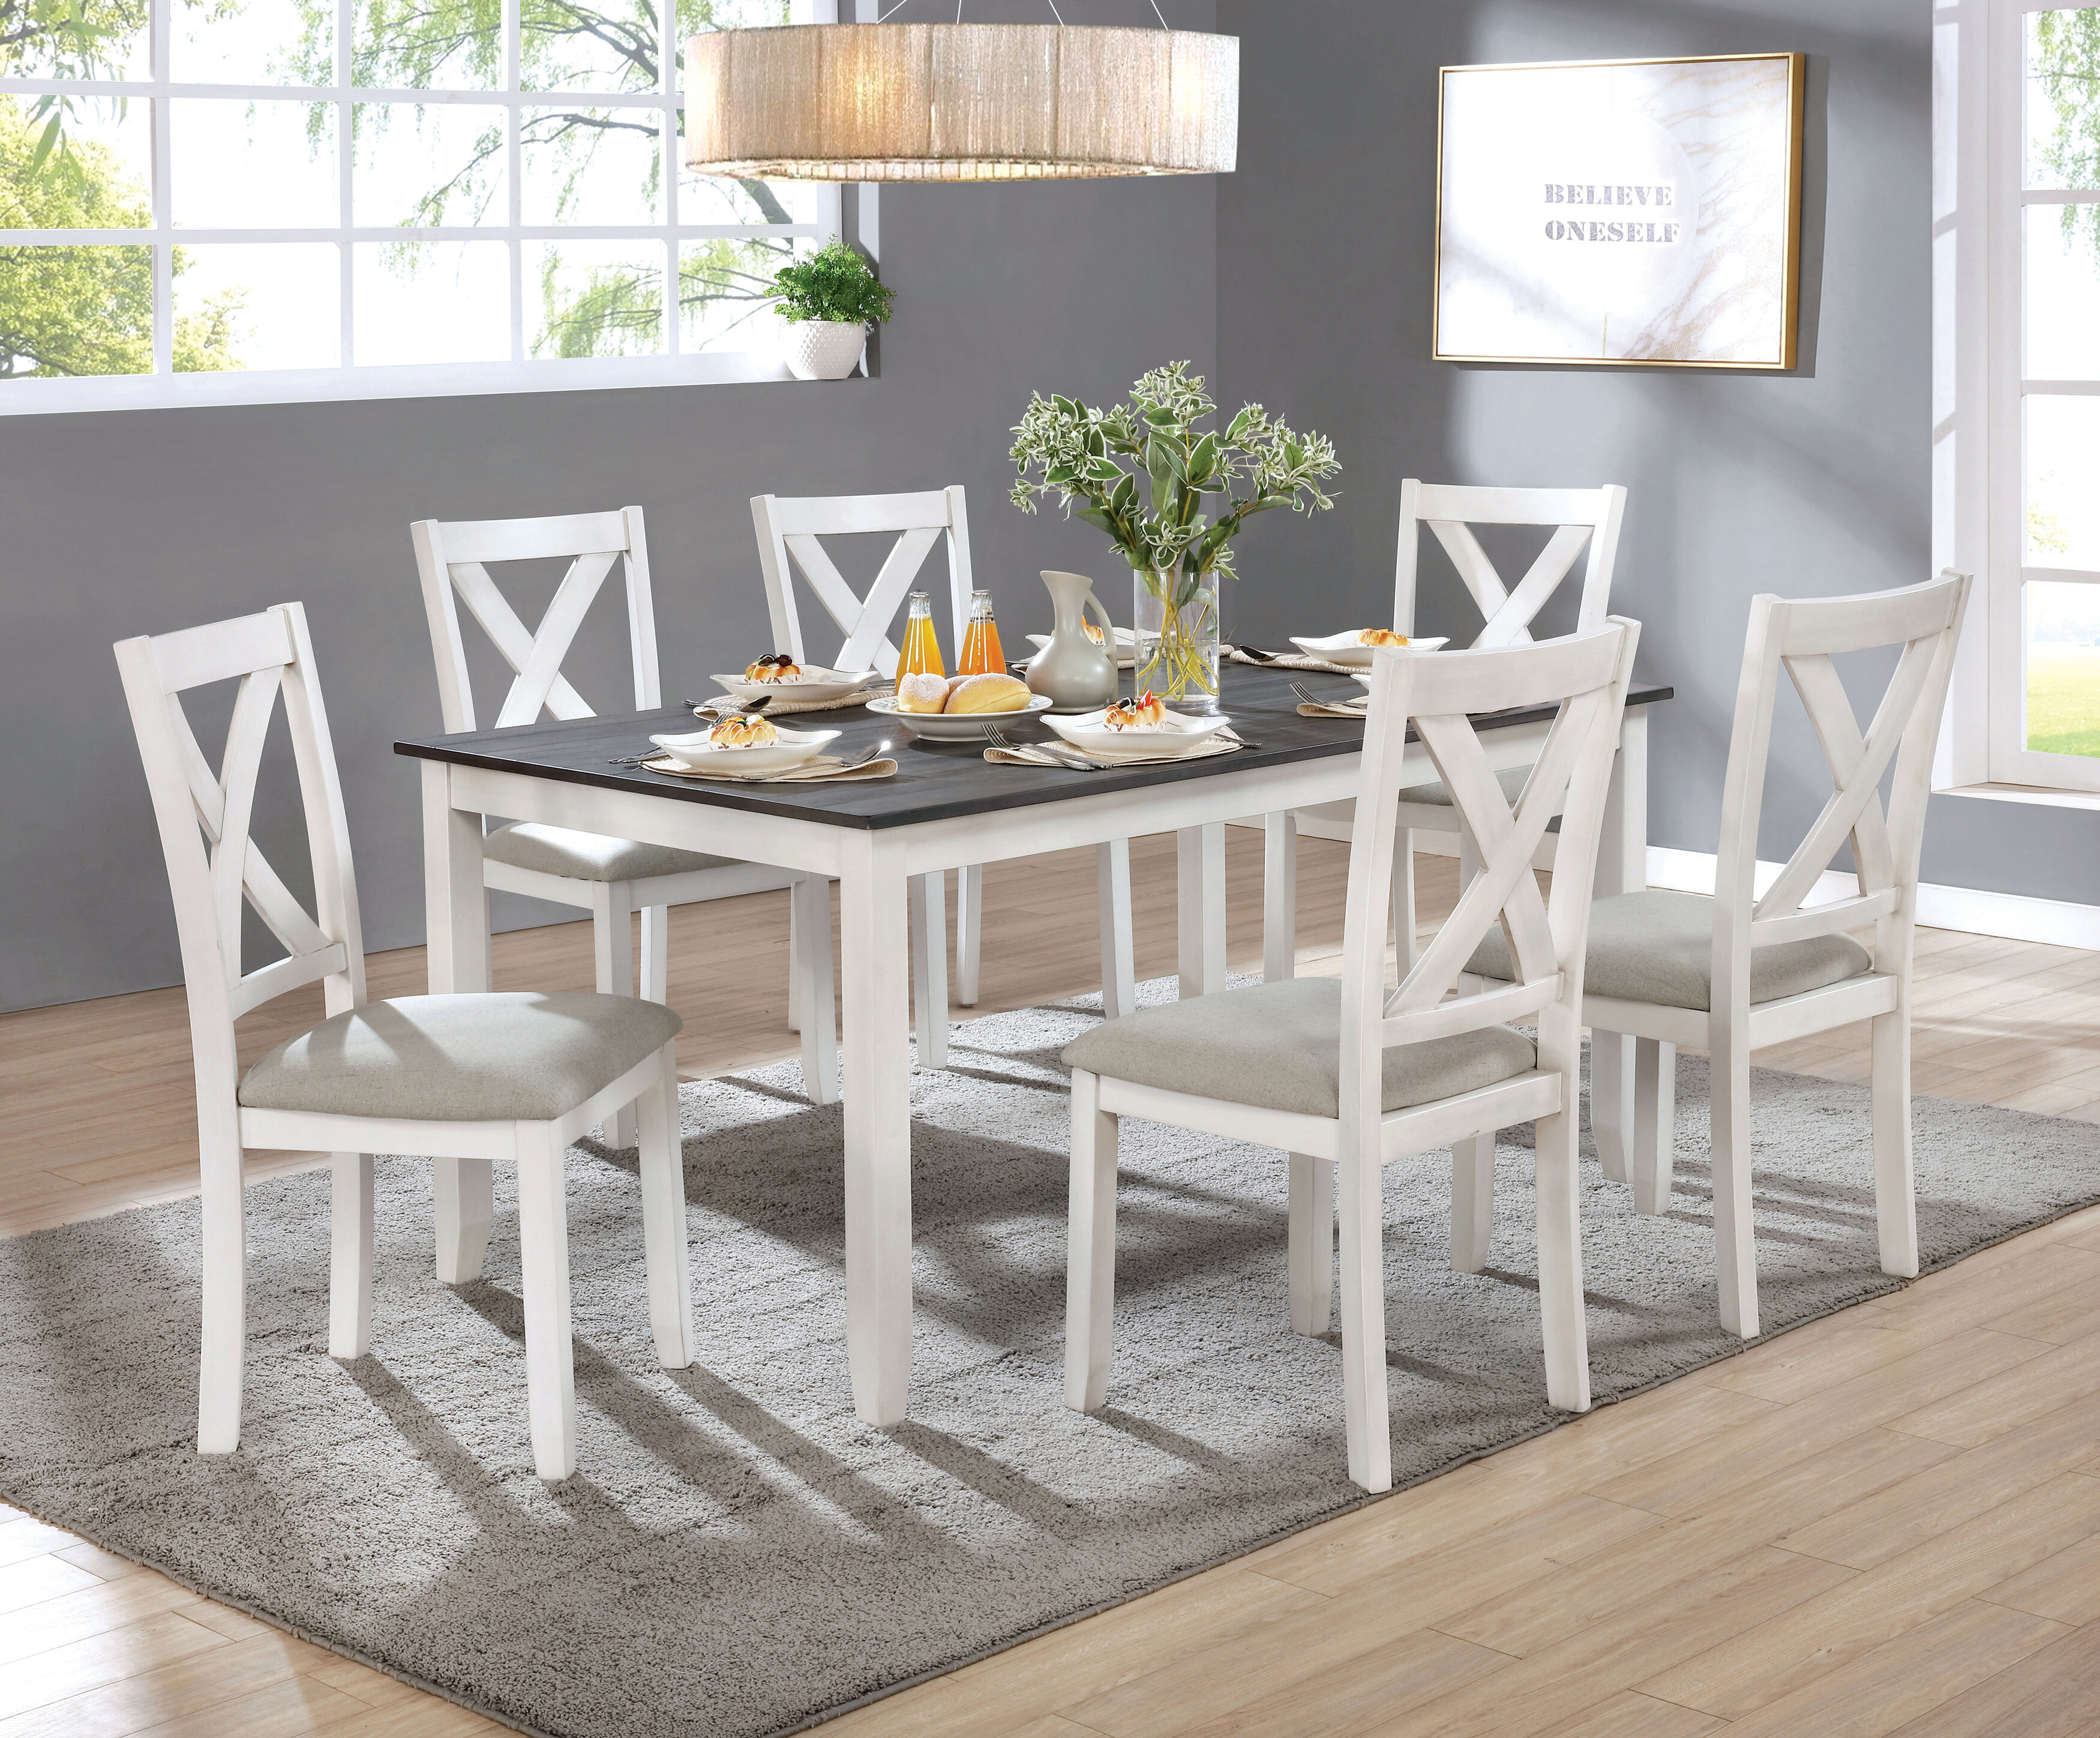 "SAVANNAH" White Glass Extendable Dining Kitchen Table & Chairs 